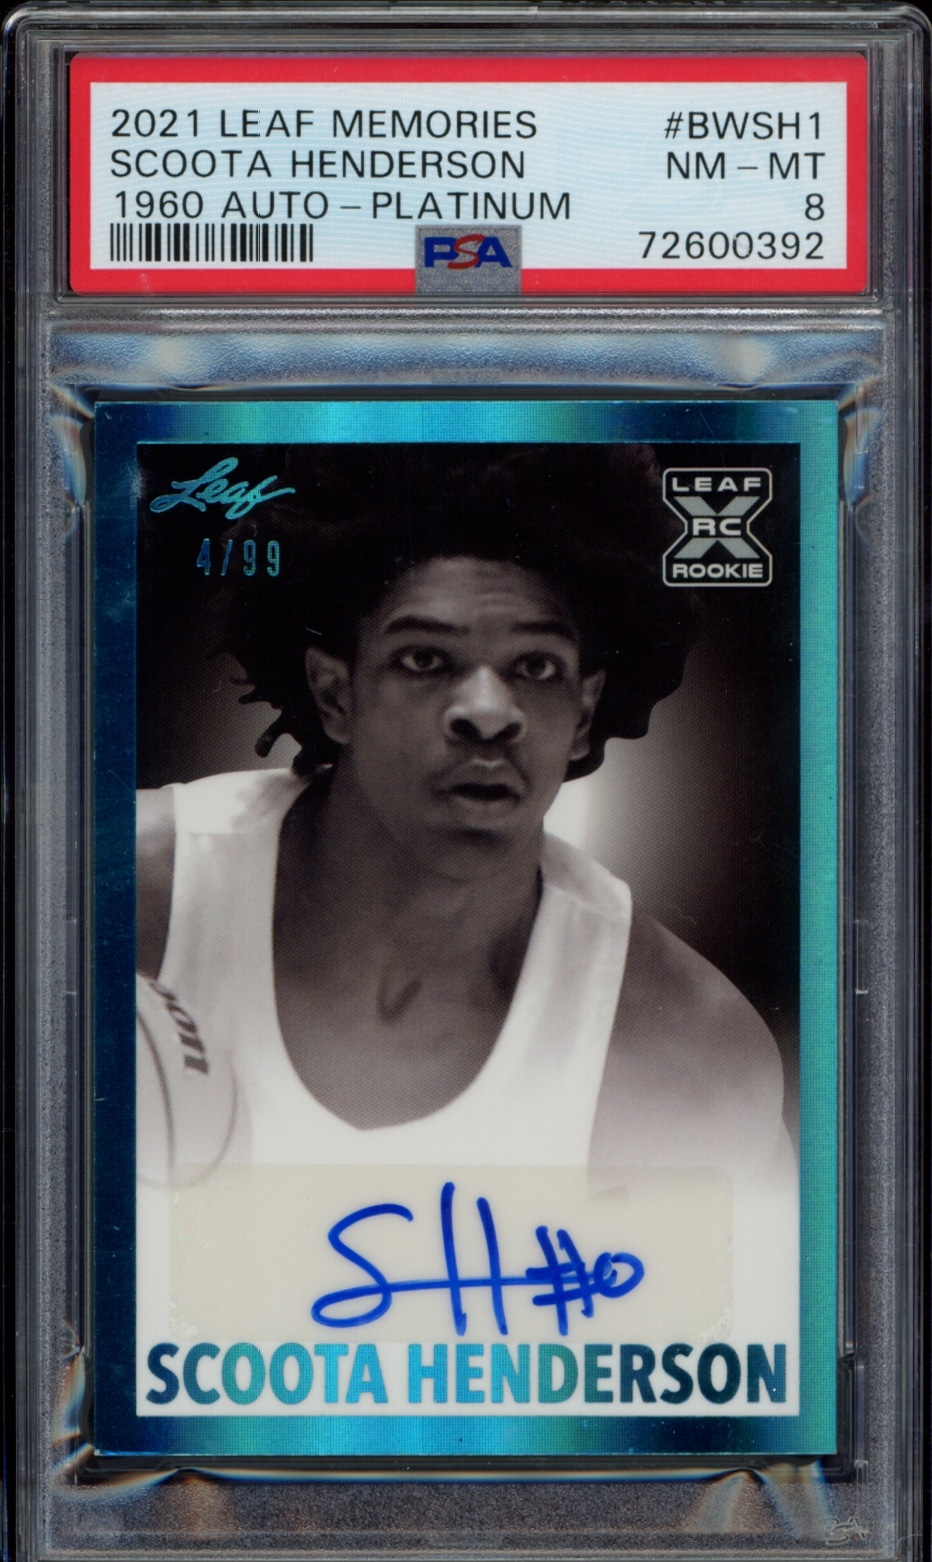 Scoota Hendersons 2021 Leaf Memories Platinum Basketball Card, autographed and rated NM-MT 8.